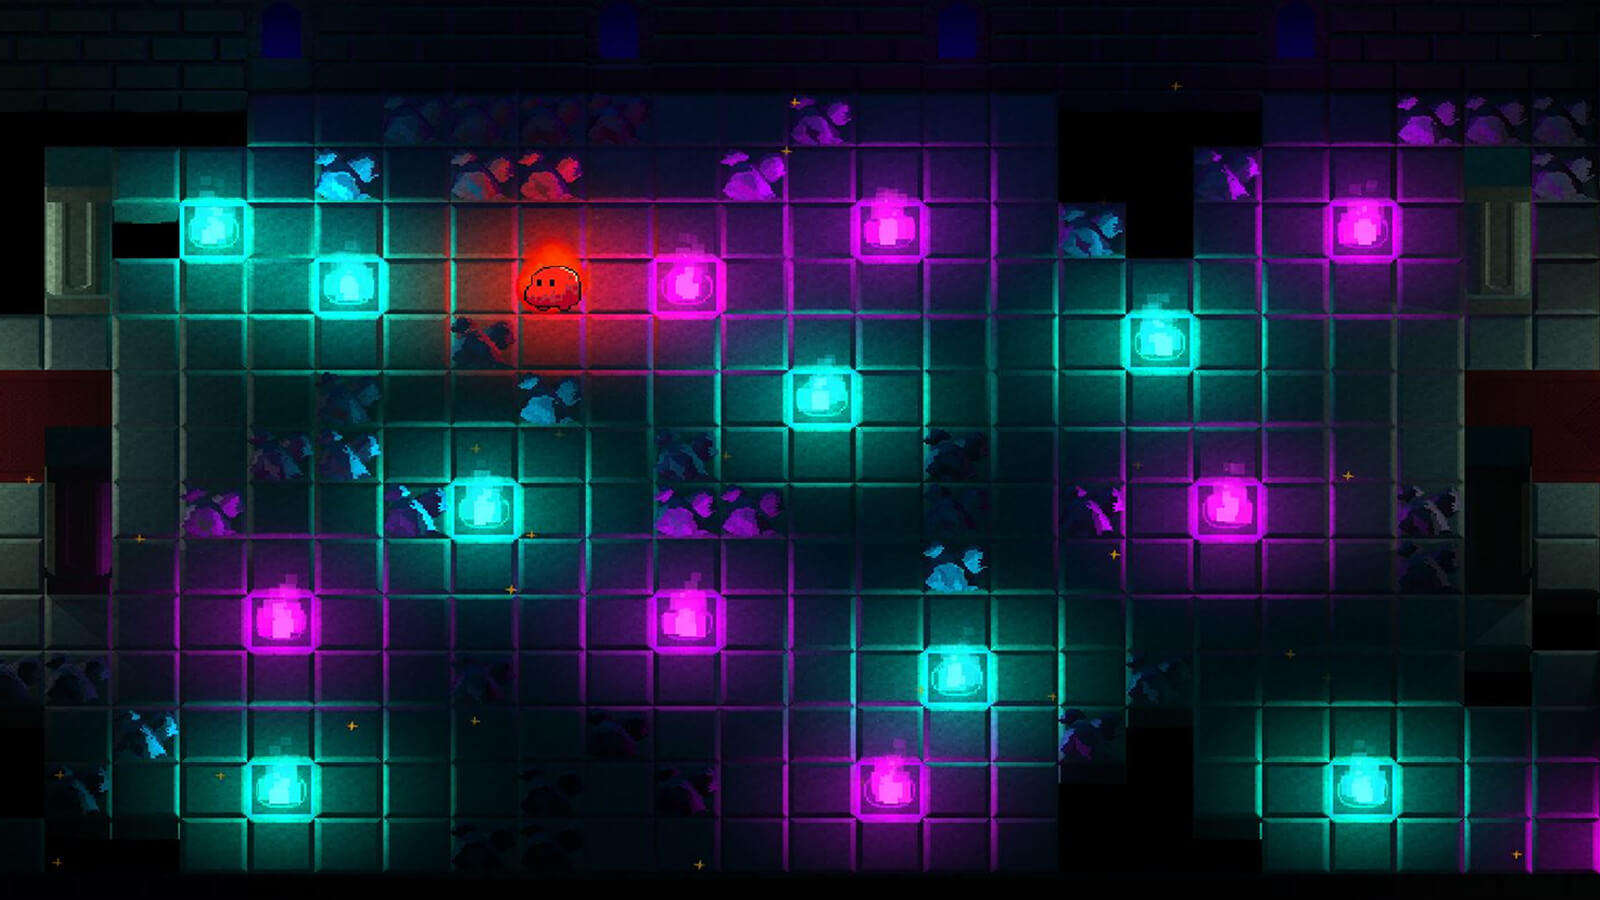 A red flame gooey stands next to turquoise and purple lanterns in a gridded room.